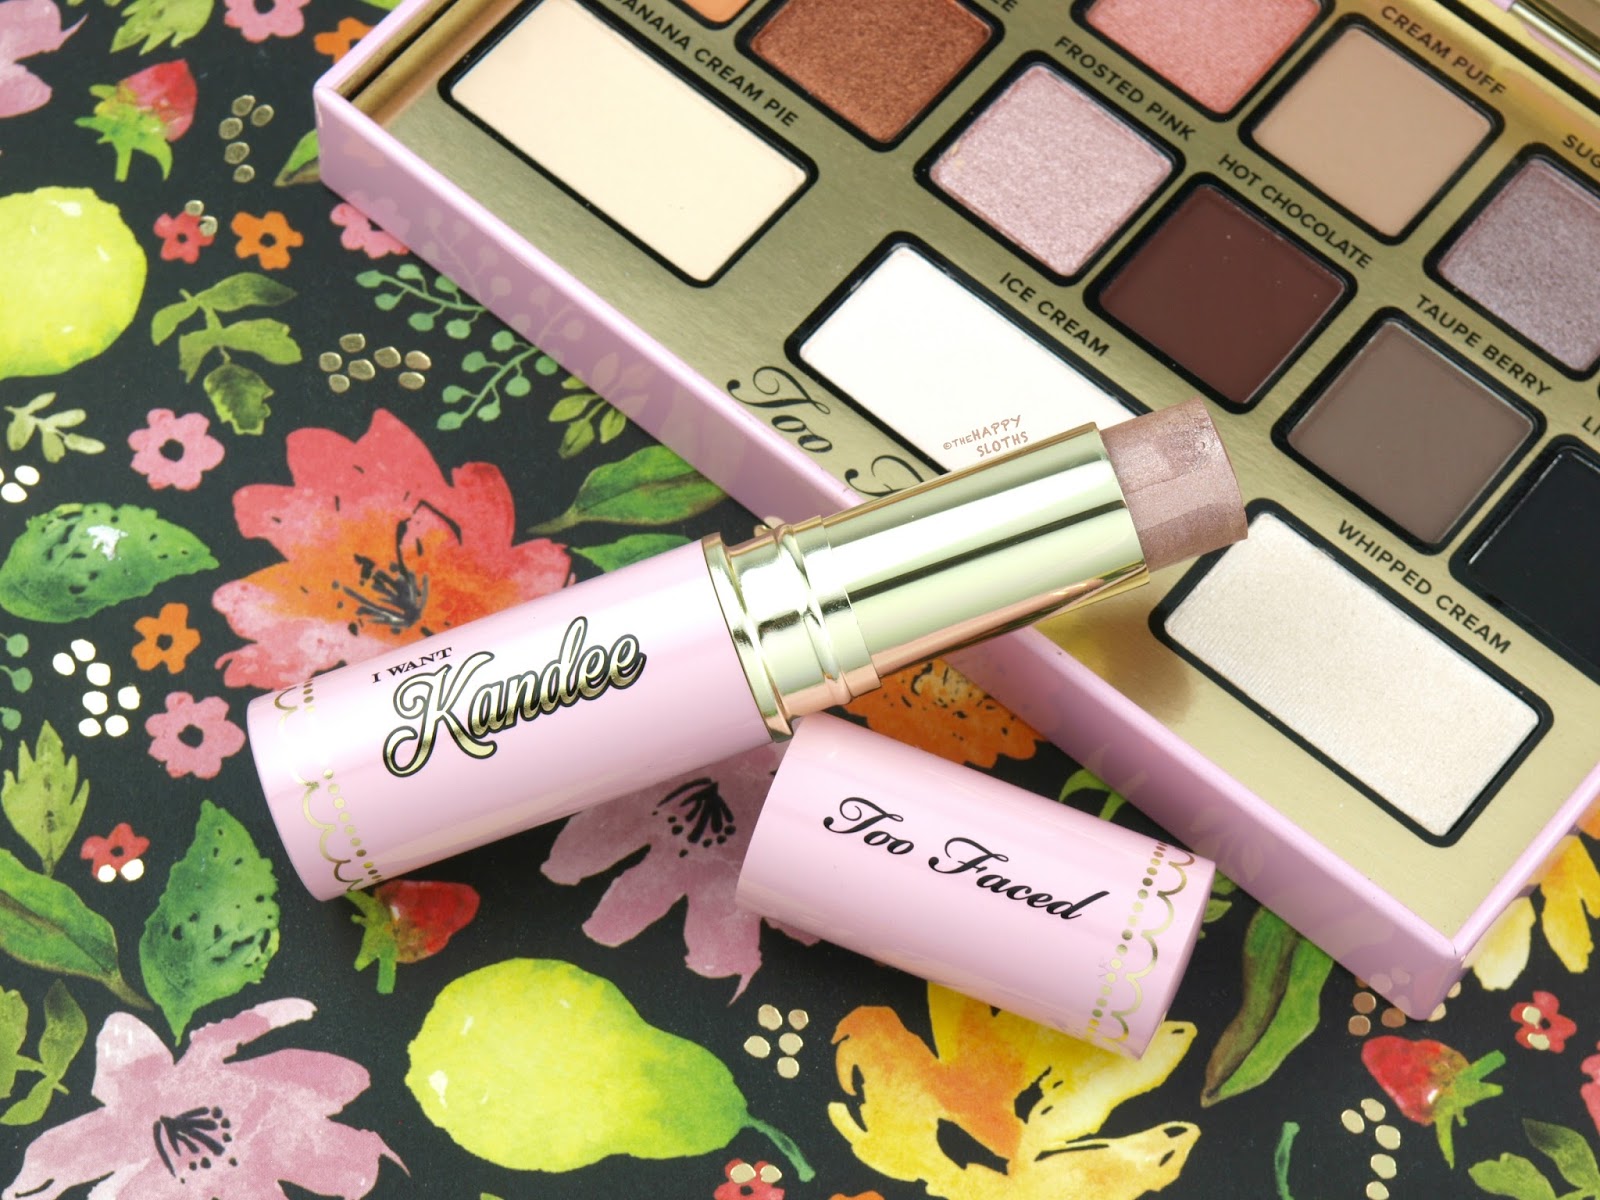 Too Faced x Kandee Johnson | I Want Kandee Candy Glow Luminizer: Review and Swatches